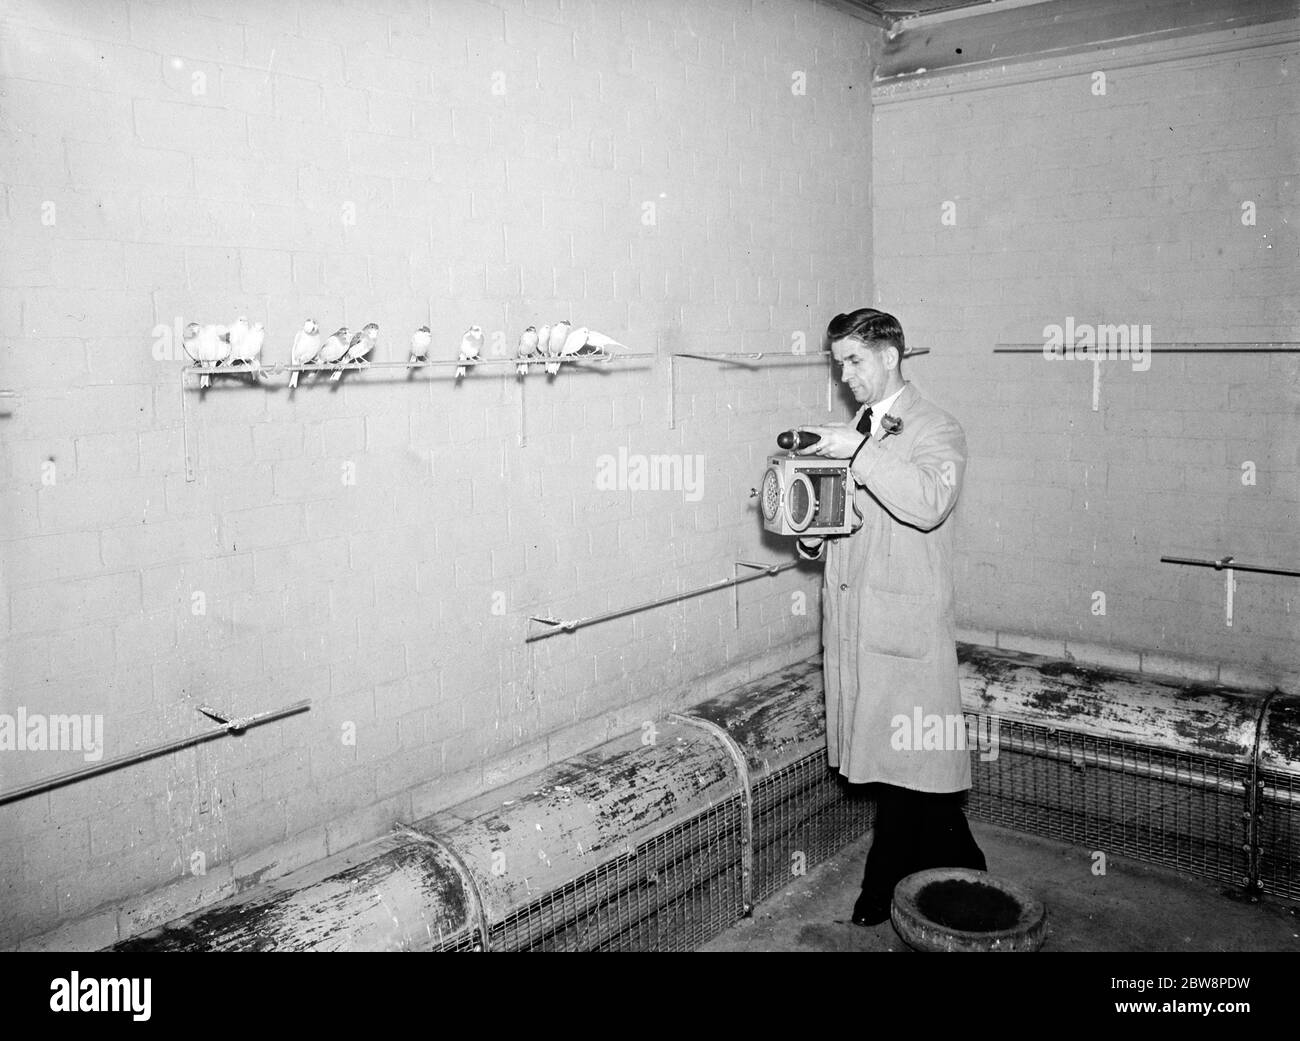 Canaries for mine work . The caretaker holds aloft the special canary cage used by miners . 1937 . Stock Photo